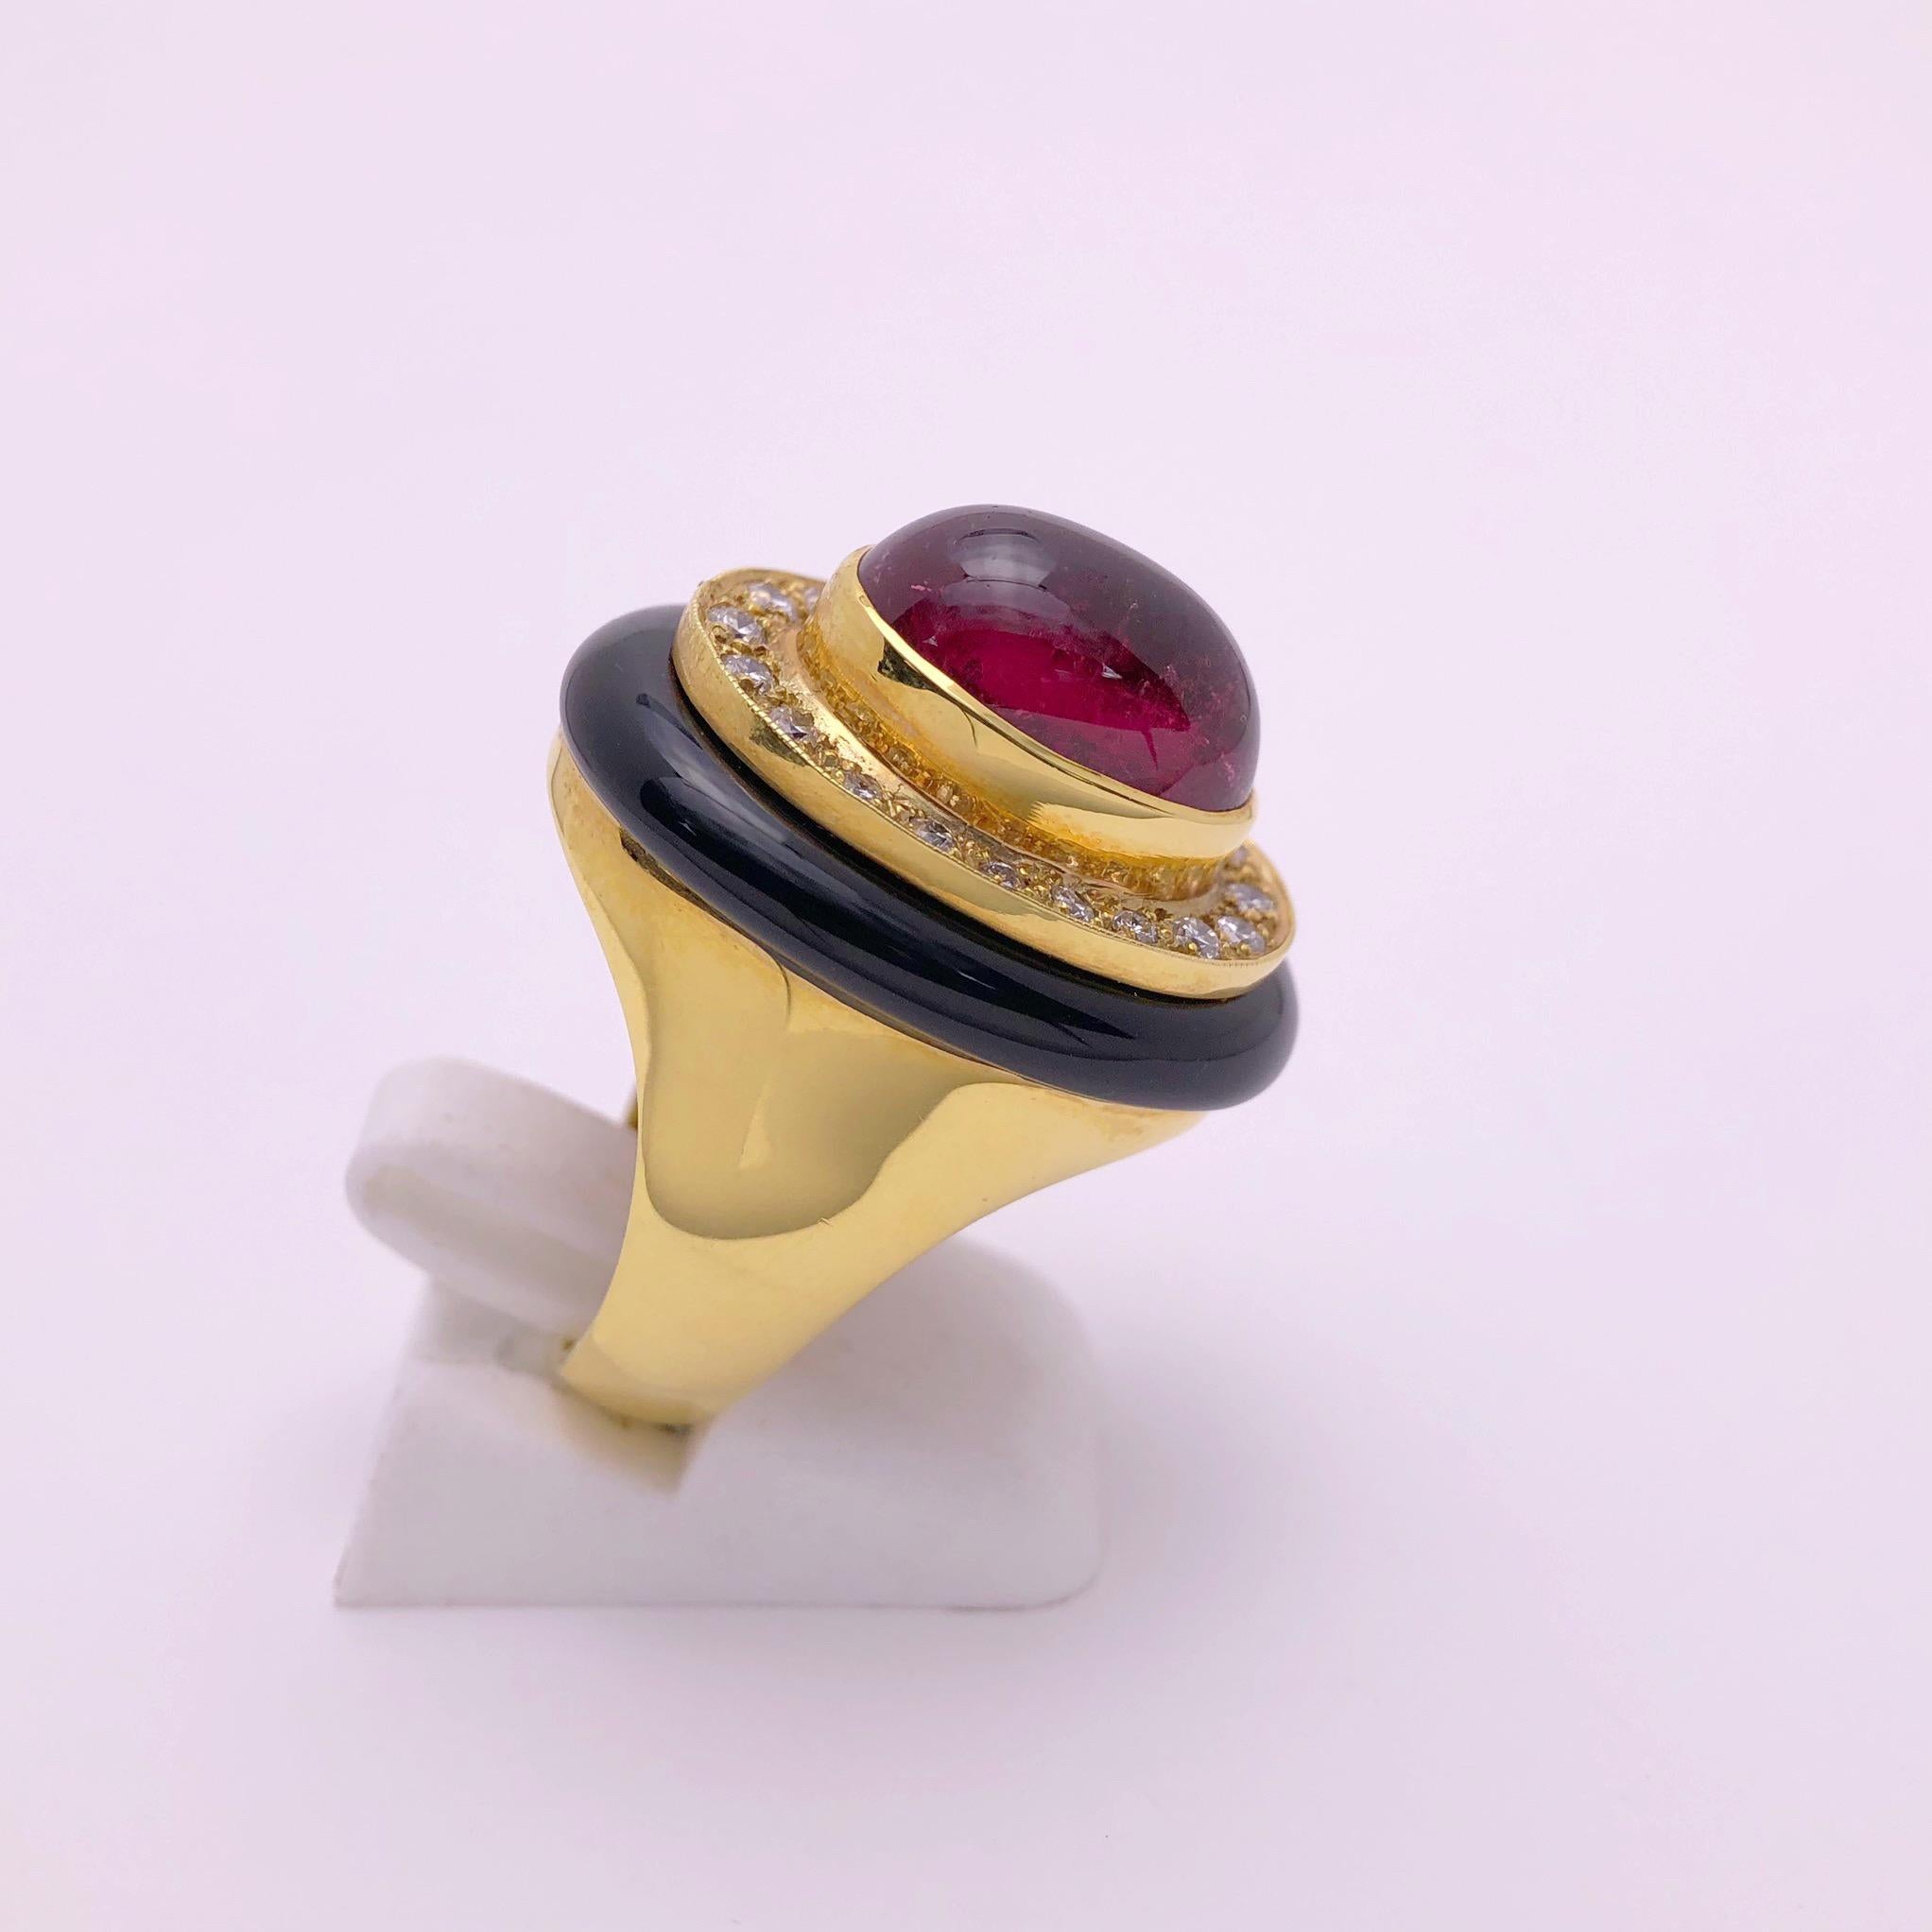 Crafted by Lagos, This 18KT Yellow Gold  ring centers an oval cabochon pink tourmaline. There are 20 round brilliant diamonds surrounding the center tourmaline, and a ring of black onyx surrounding the diamonds. The shank of the ring is a